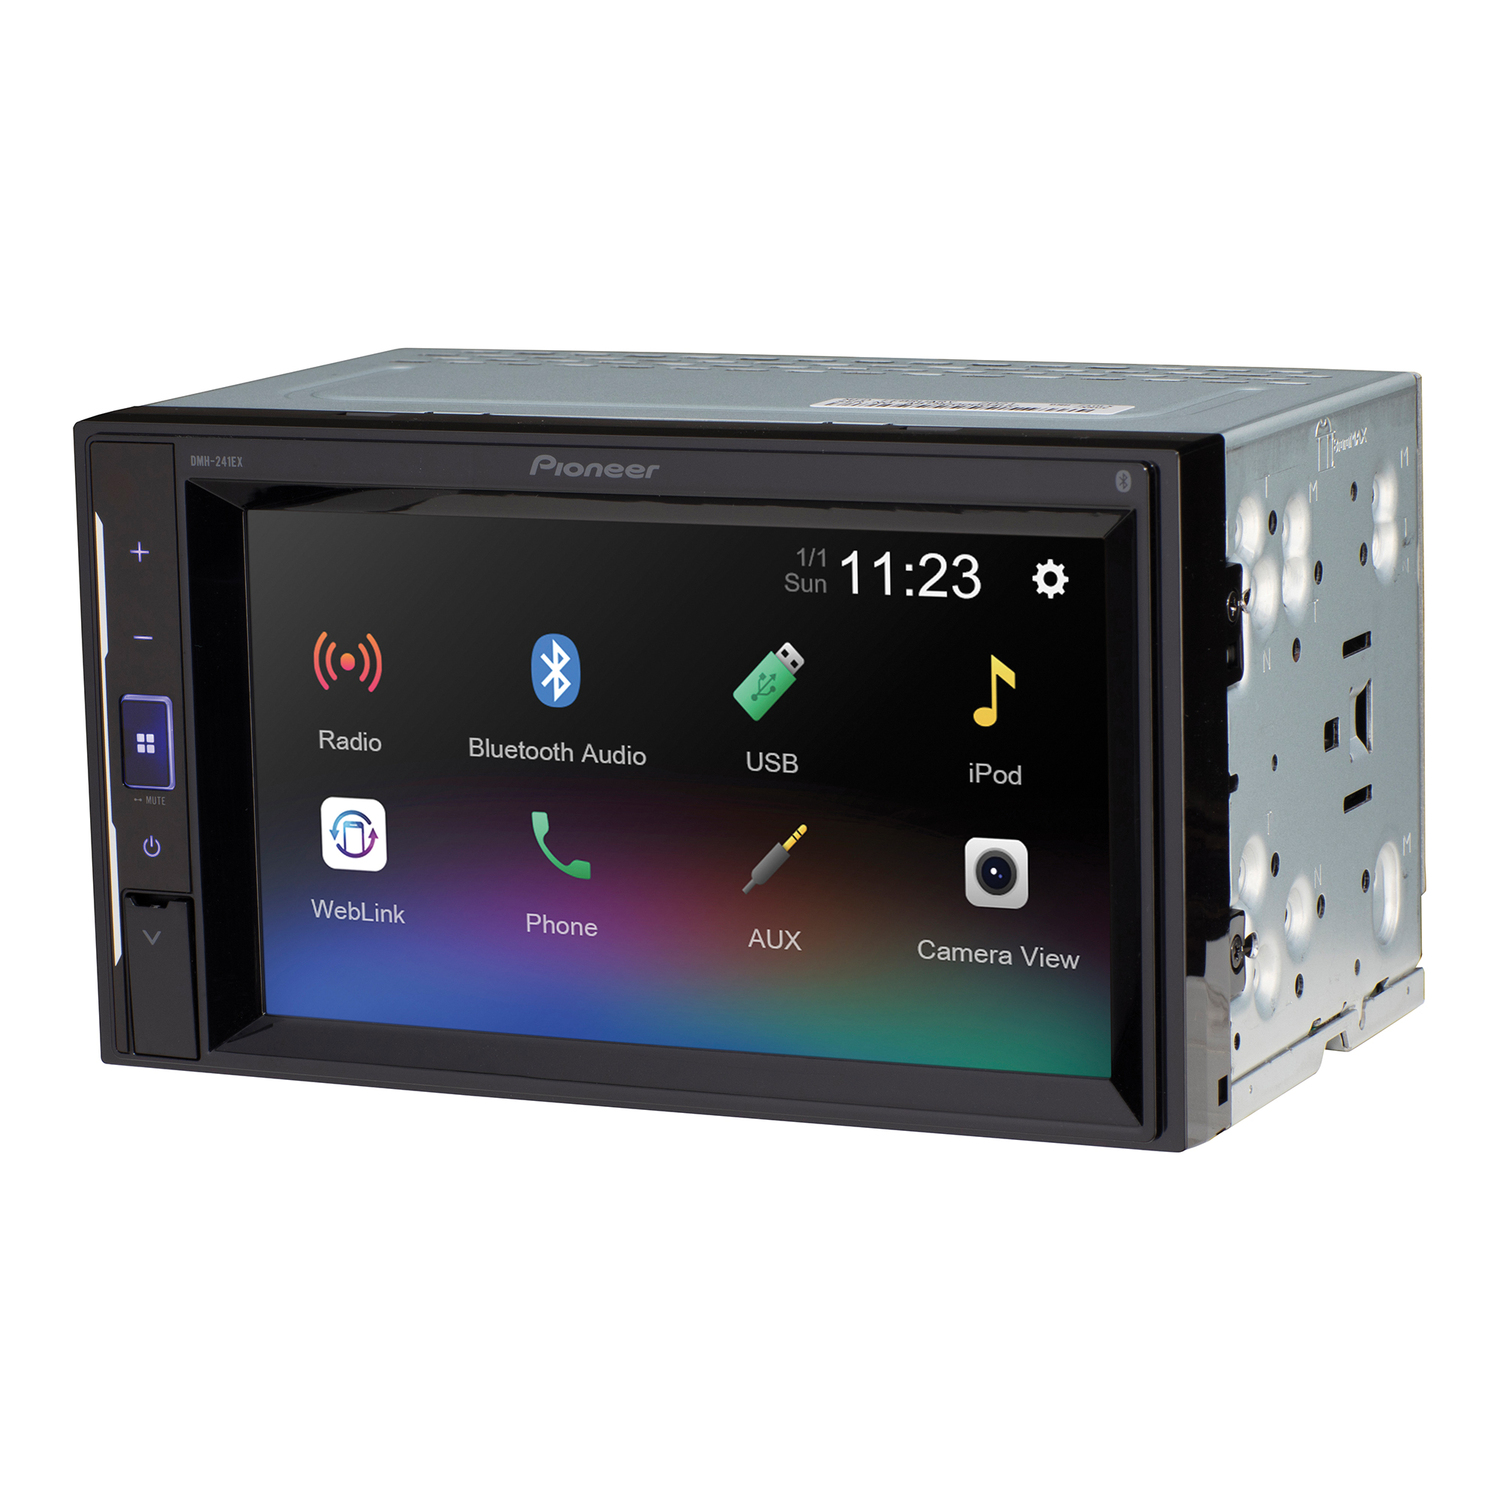 Pioneer DMH-241EX 6.2-In. Car In-Dash Unit, Double-DIN Digital Media Receiver with Touch Screen and Bluetooth, DMH-241EX - image 3 of 9